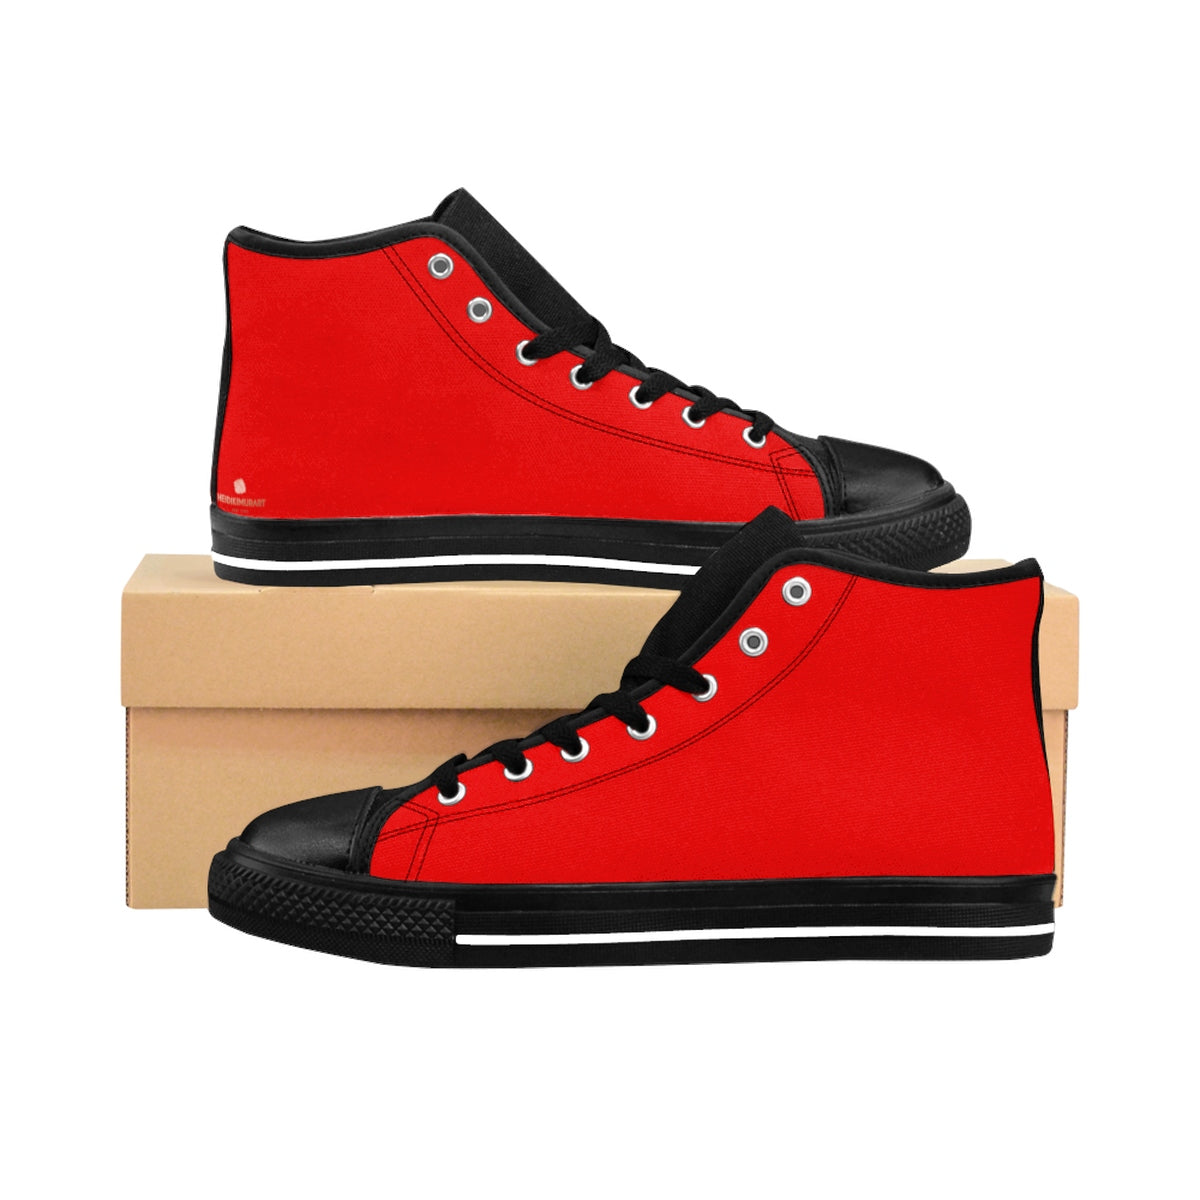 Red Women's Sneakers, Solid Color 